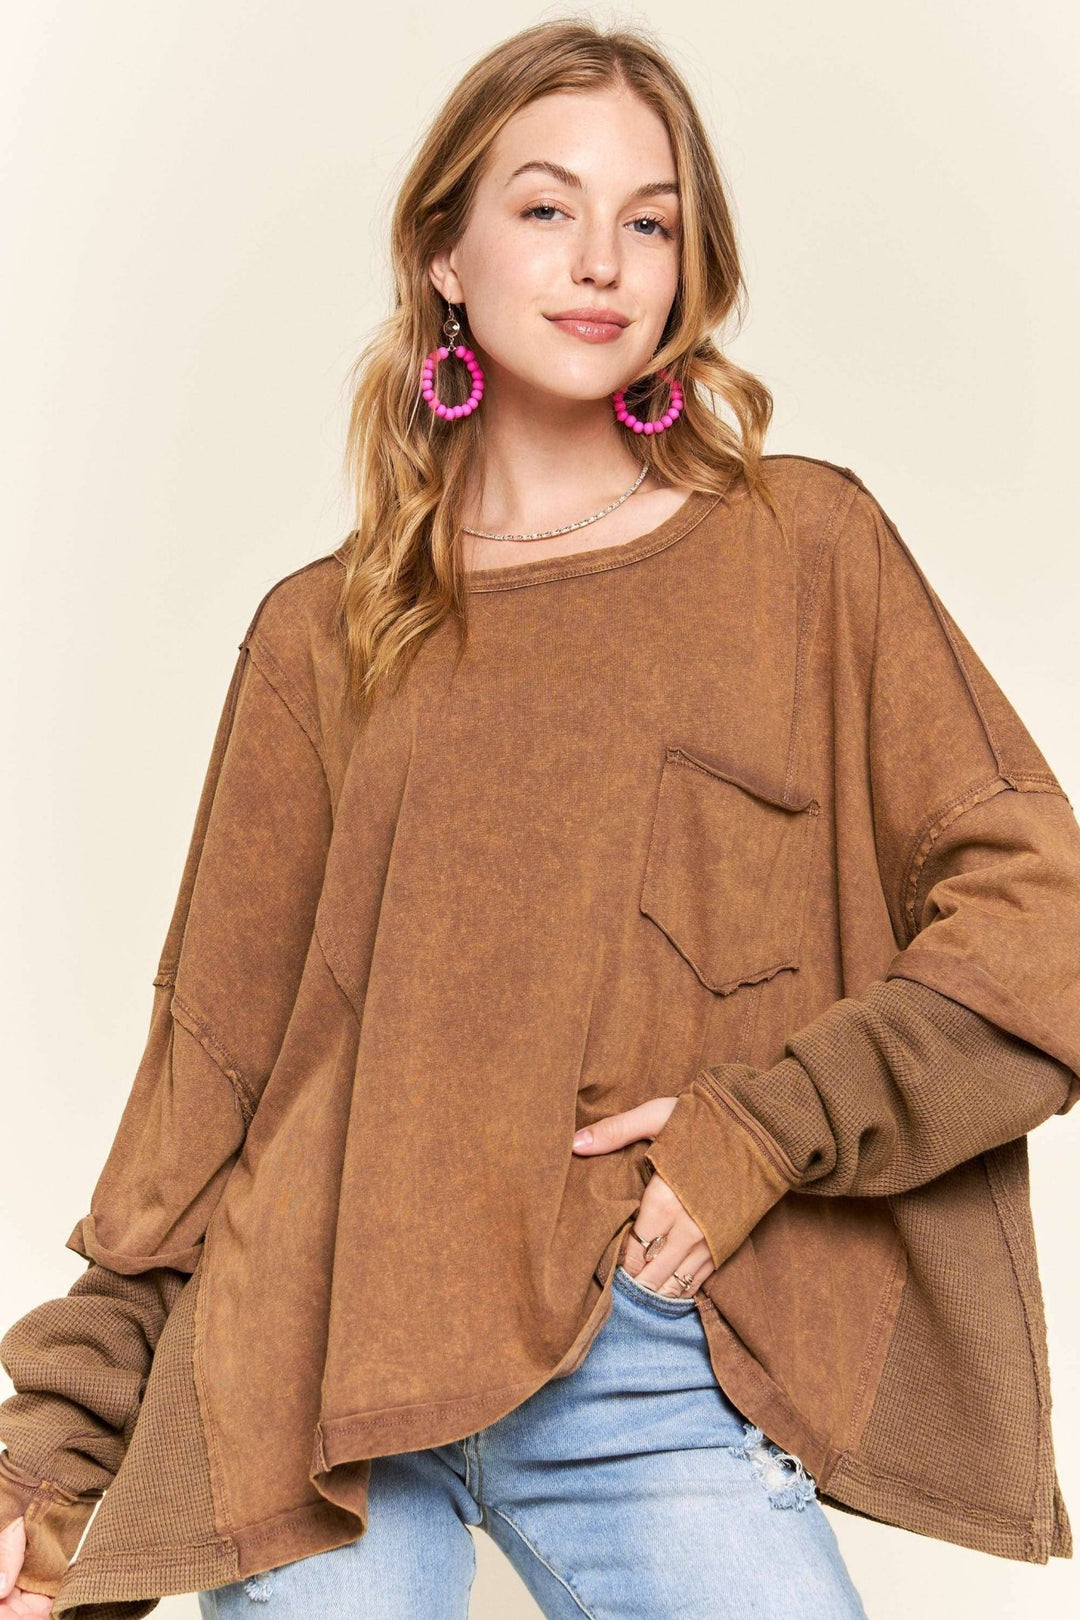 LONG SLEEVE BOXY MINERAL WASHED TOP - Modish Maven Boutique